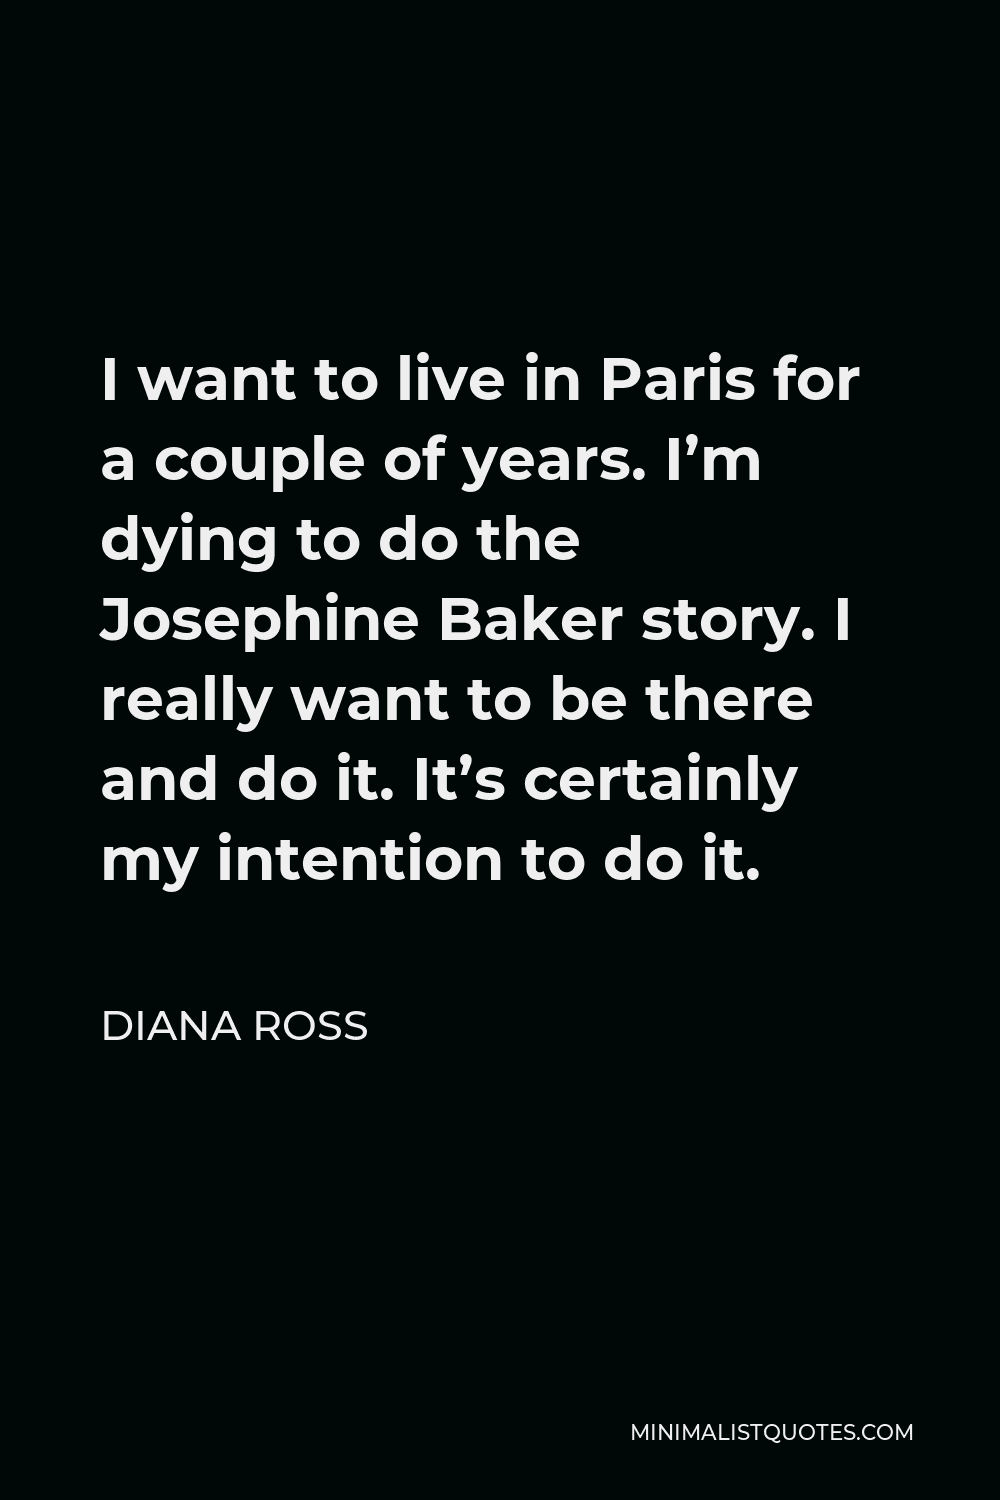 Diana Ross Quote - I want to live in Paris for a couple of years. I’m dying to do the Josephine Baker story. I really want to be there and do it. It’s certainly my intention to do it.